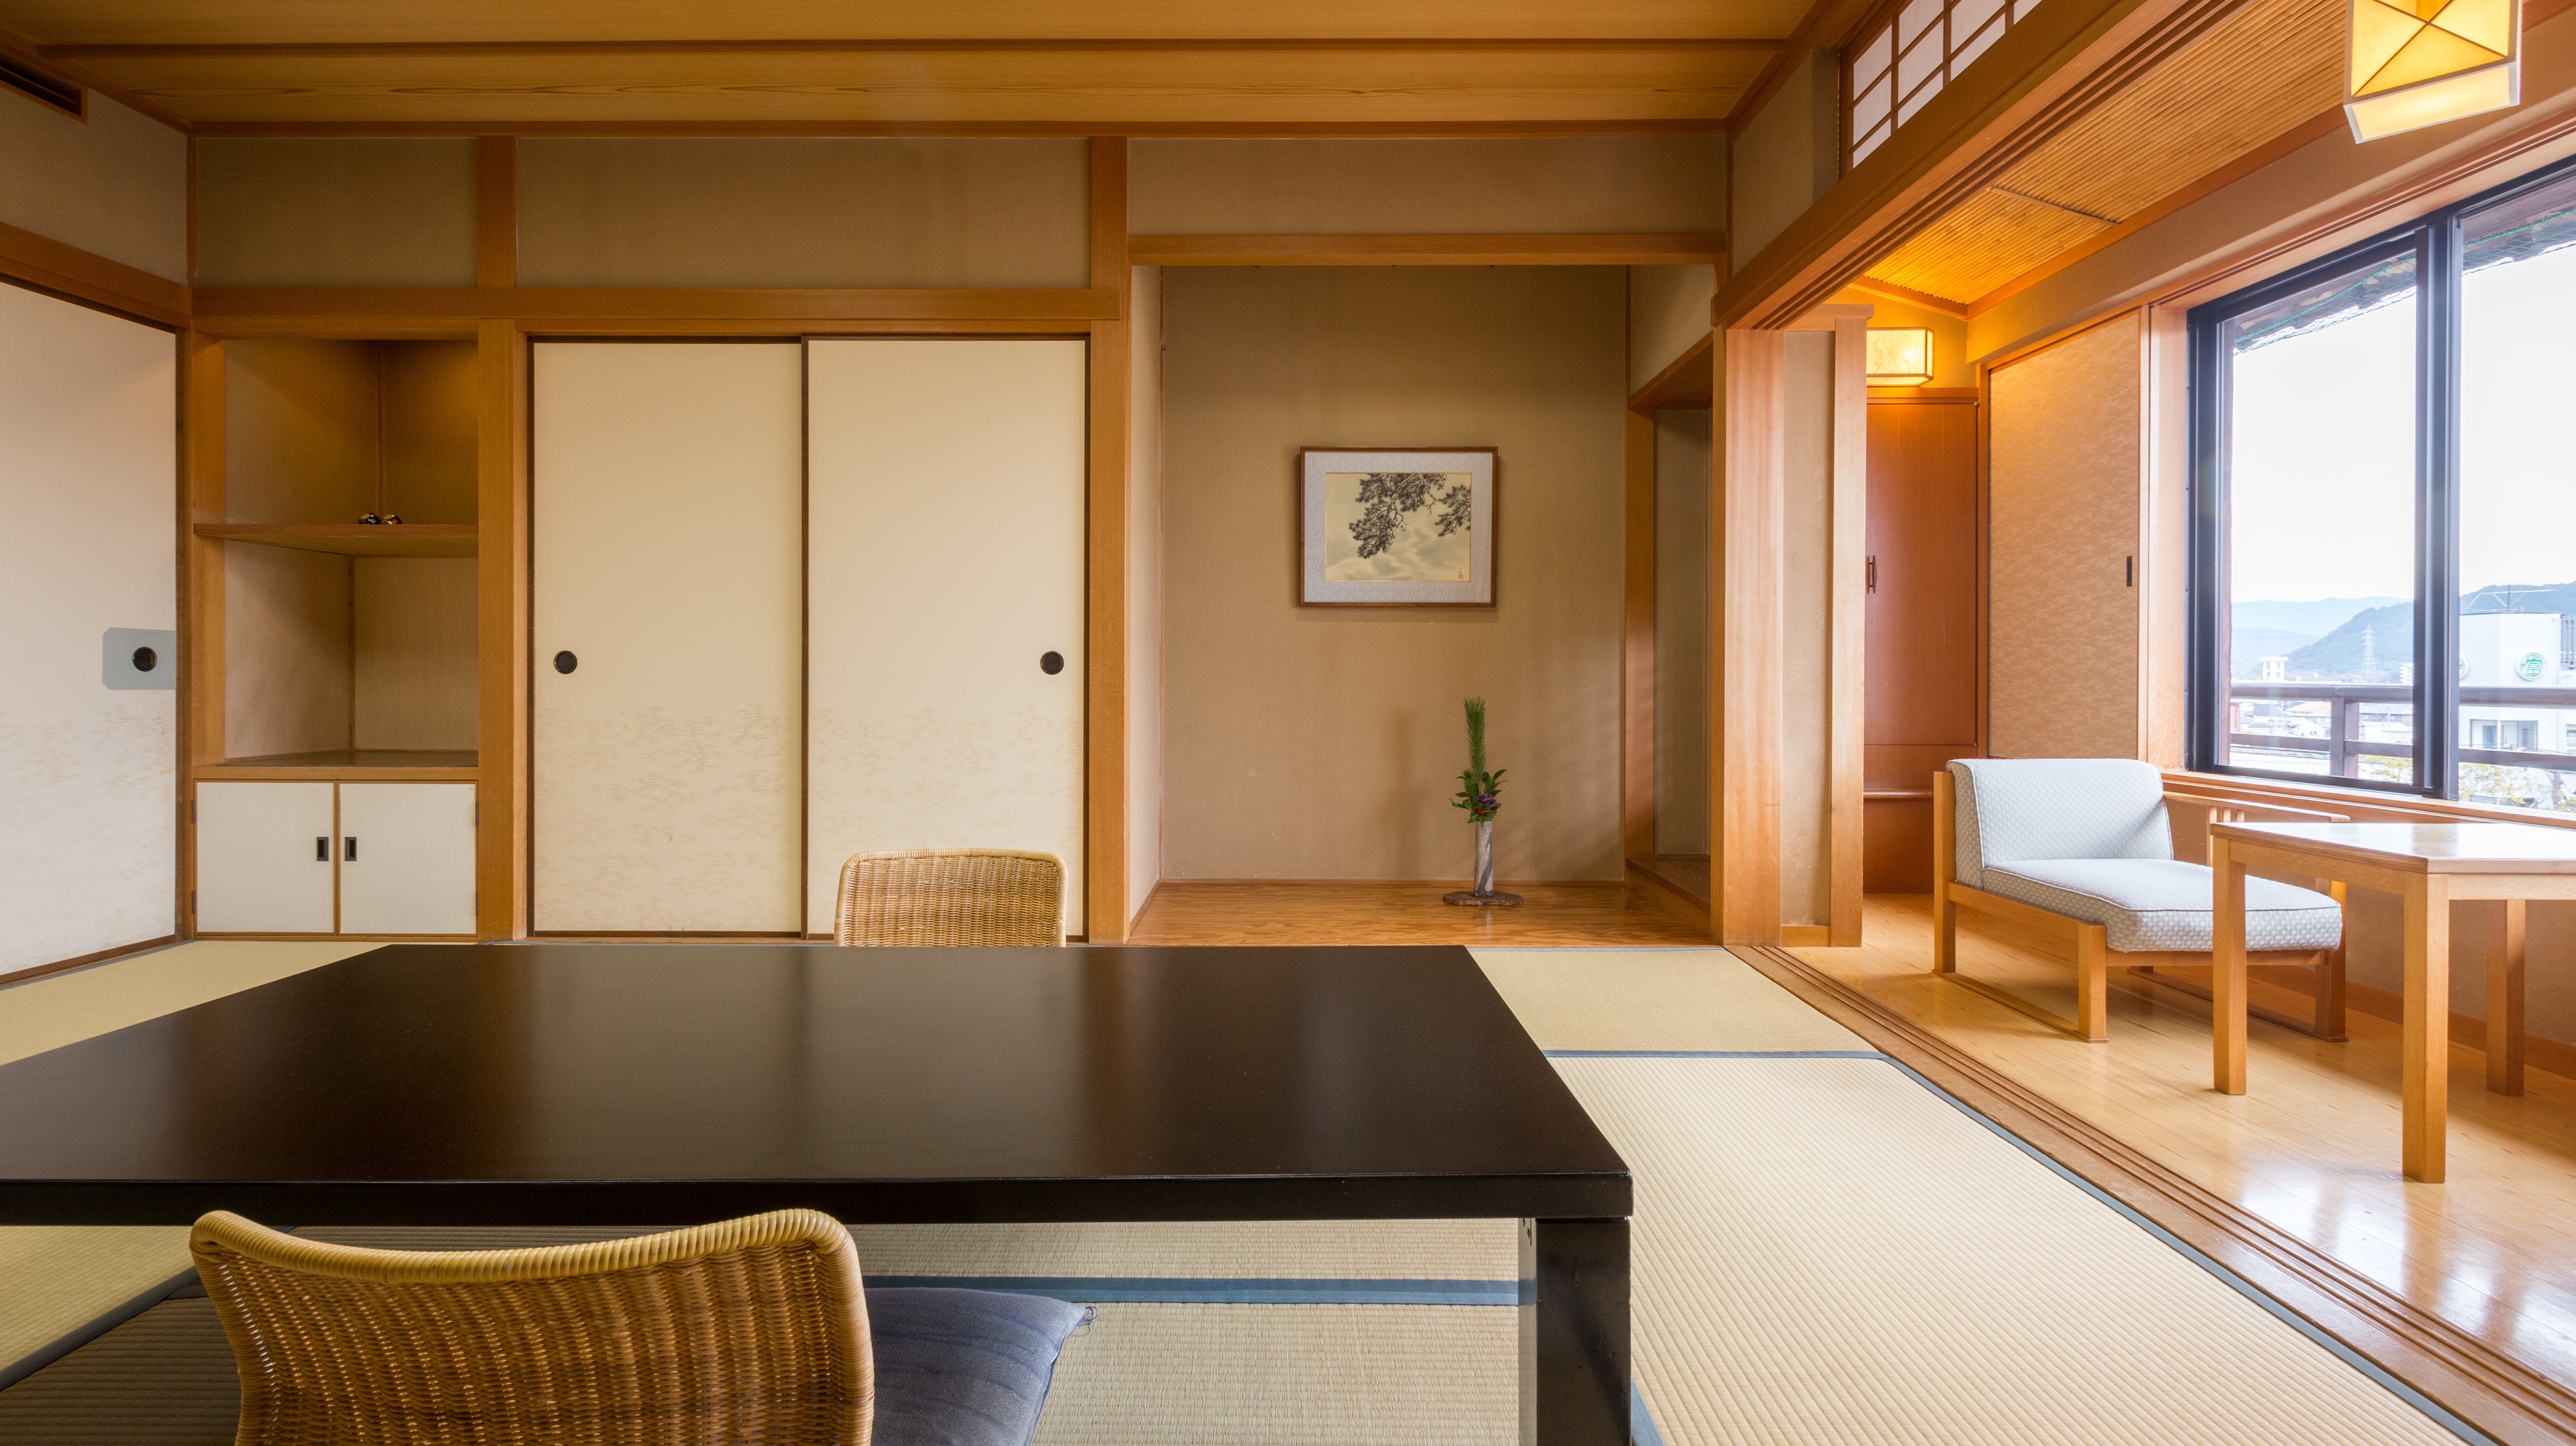 [Annex] Japanese-style room 10 tatami mats <Purely Japanese appearance>